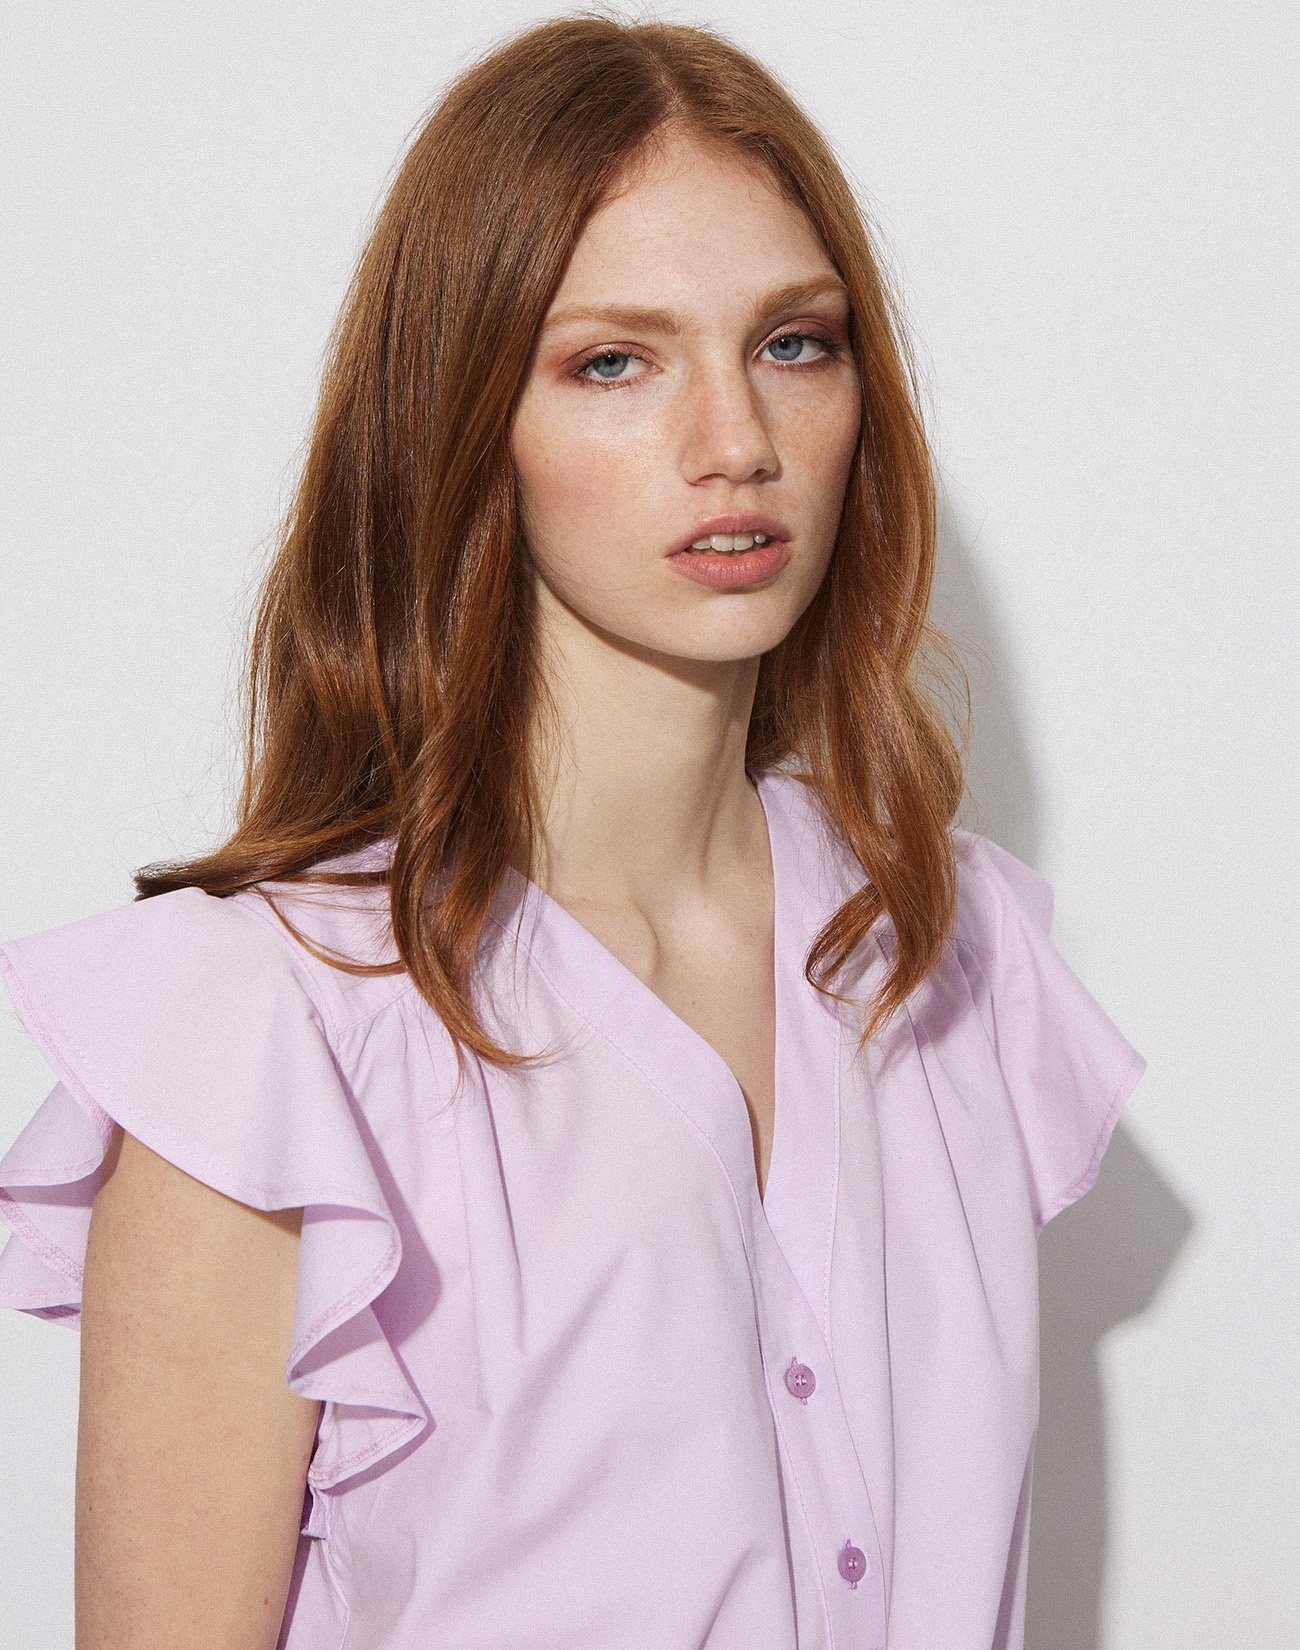 Poplin top with buttons